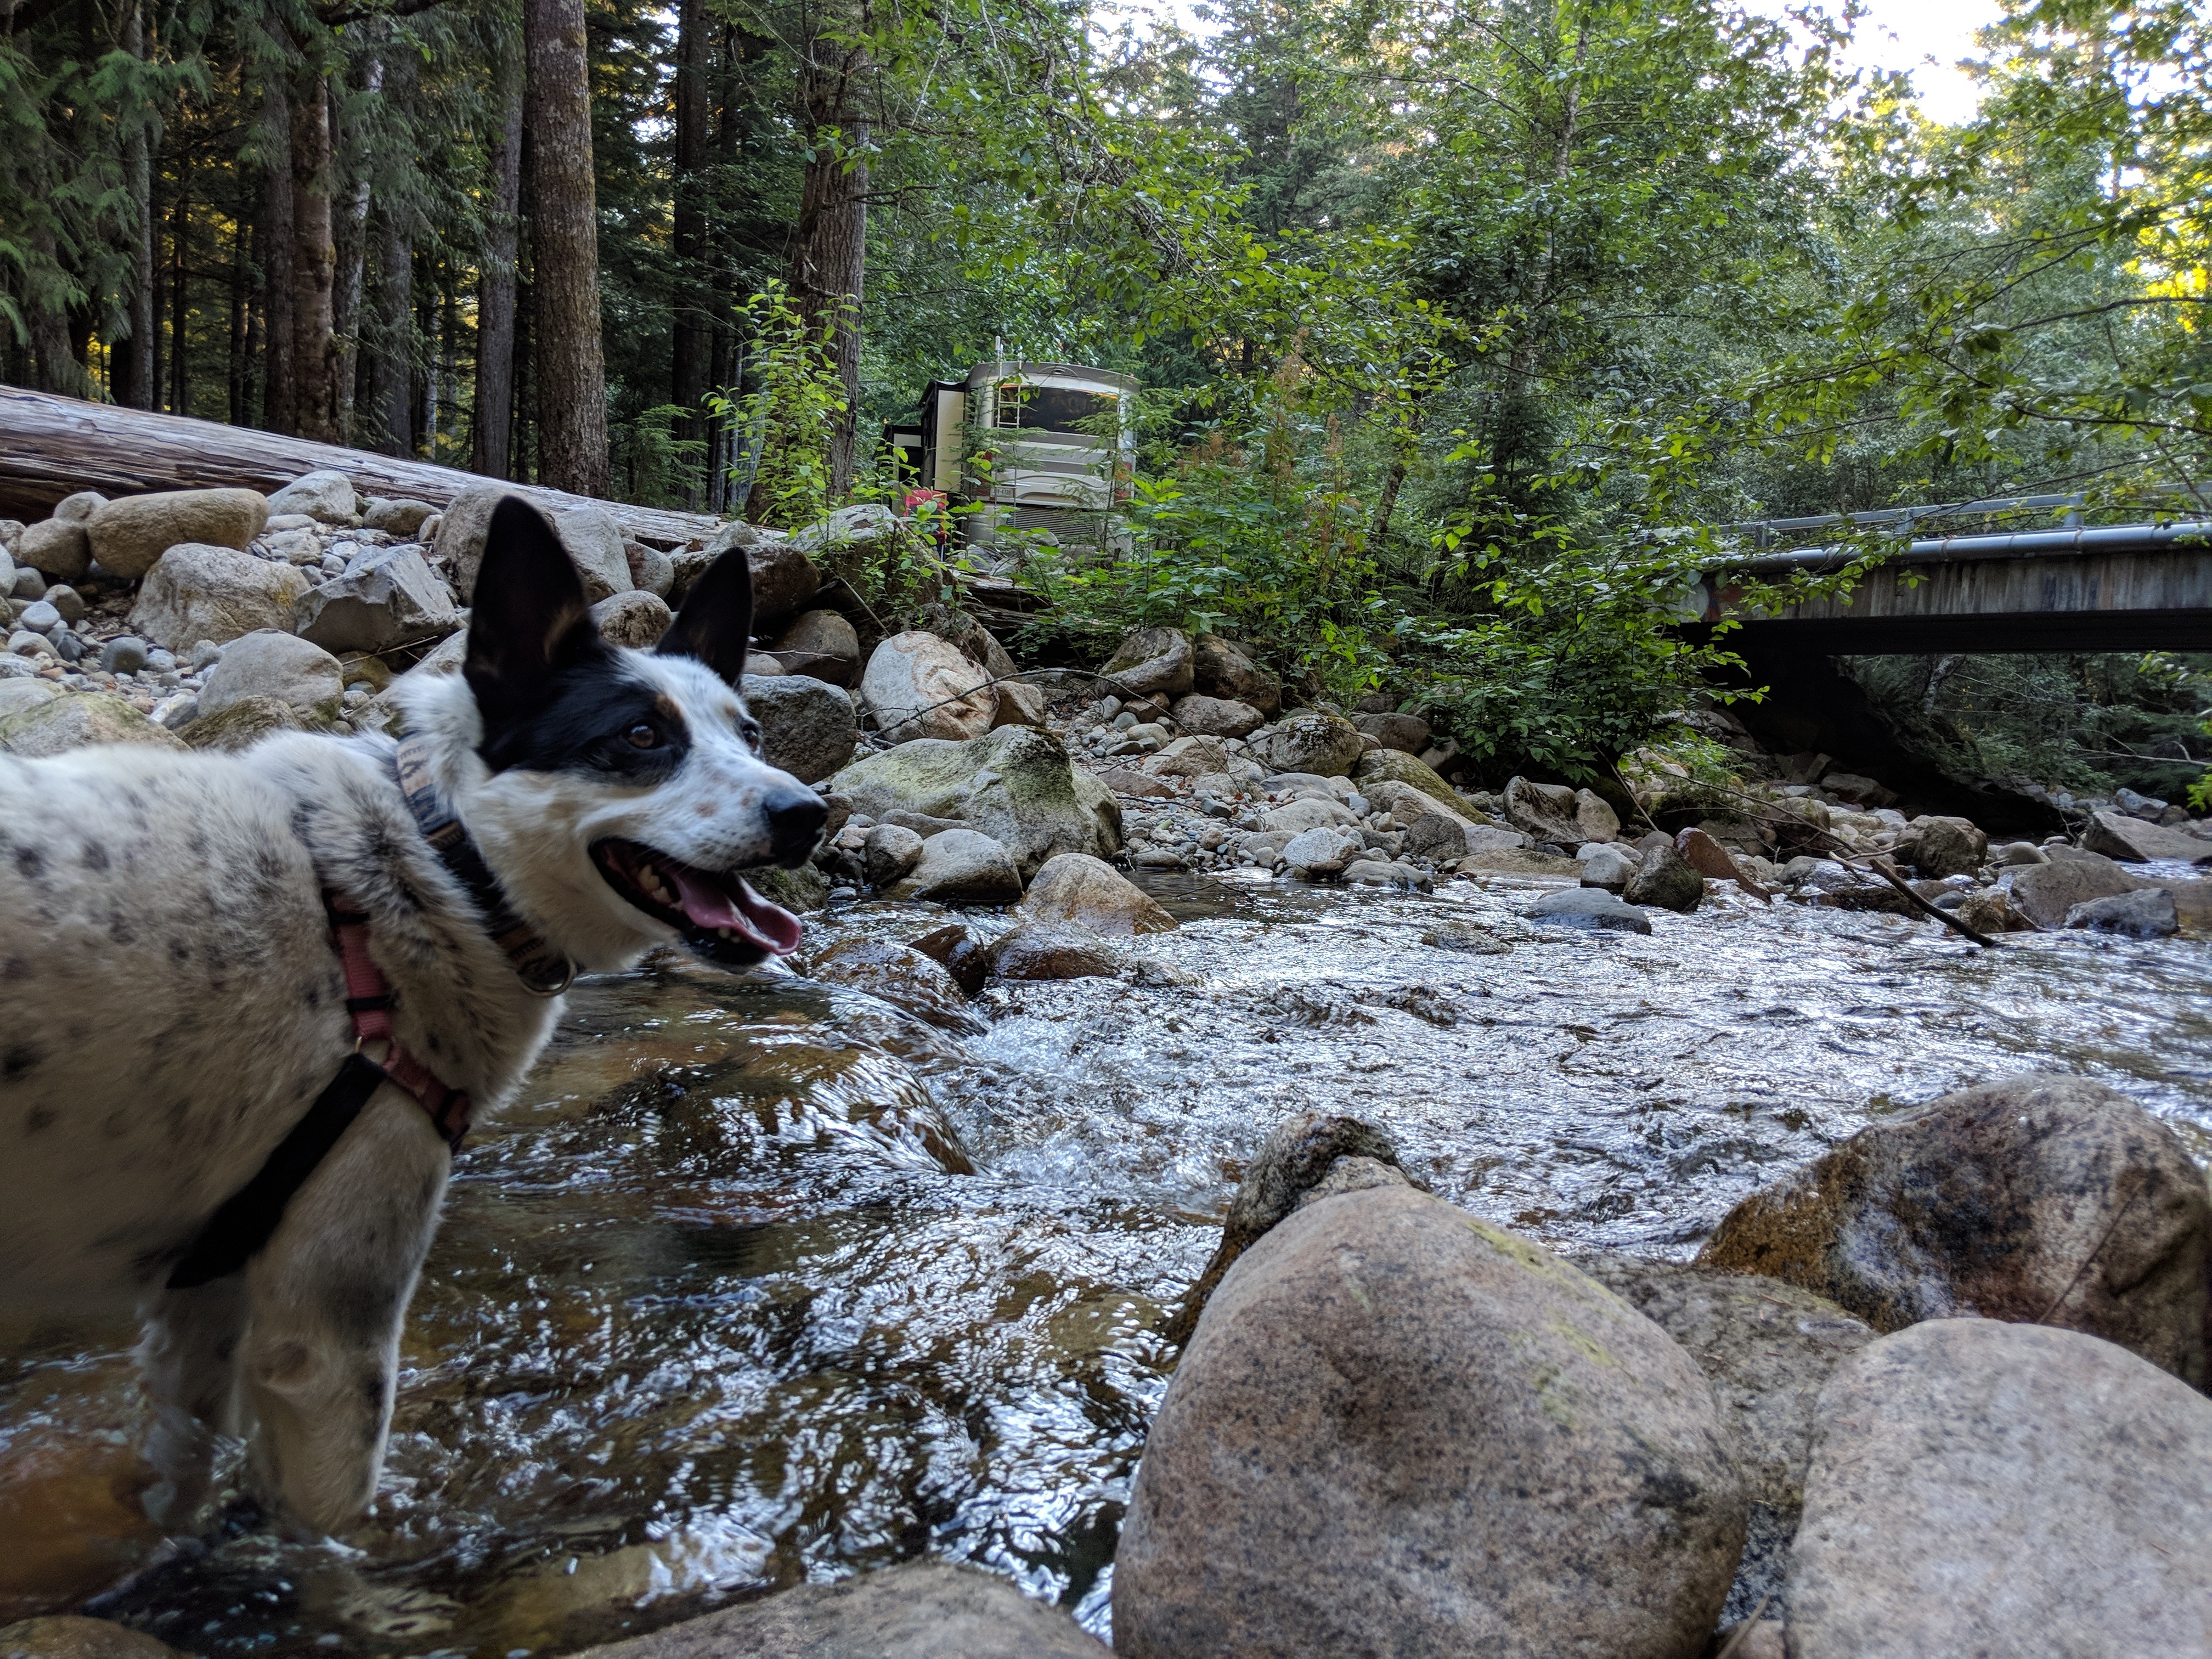 This creek is Mushy Approved(tm)